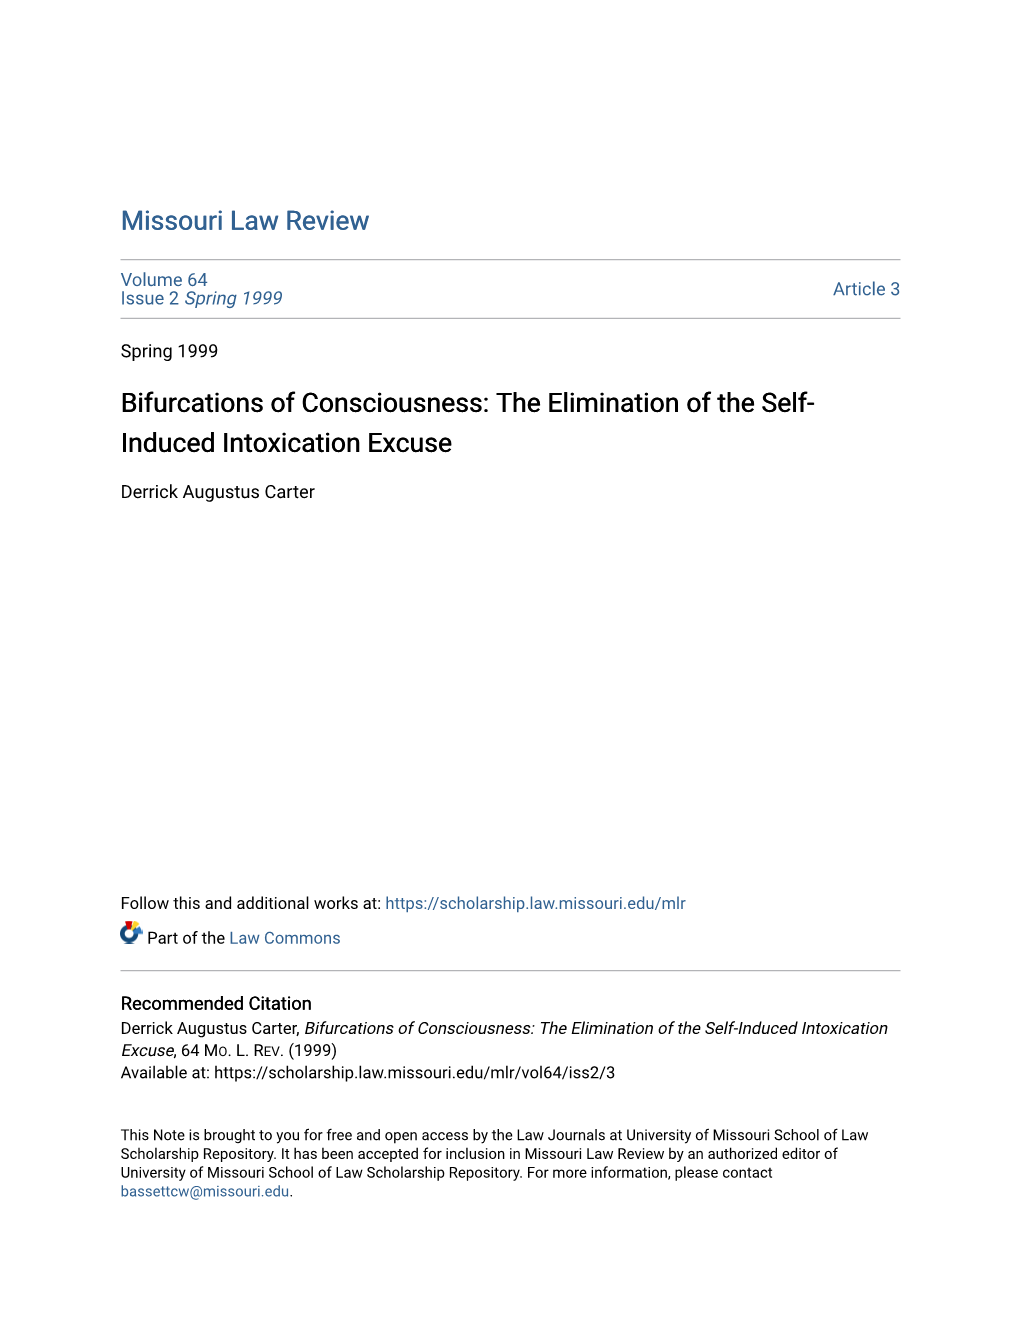 The Elimination of the Self-Induced Intoxication Excuse, 64 MO